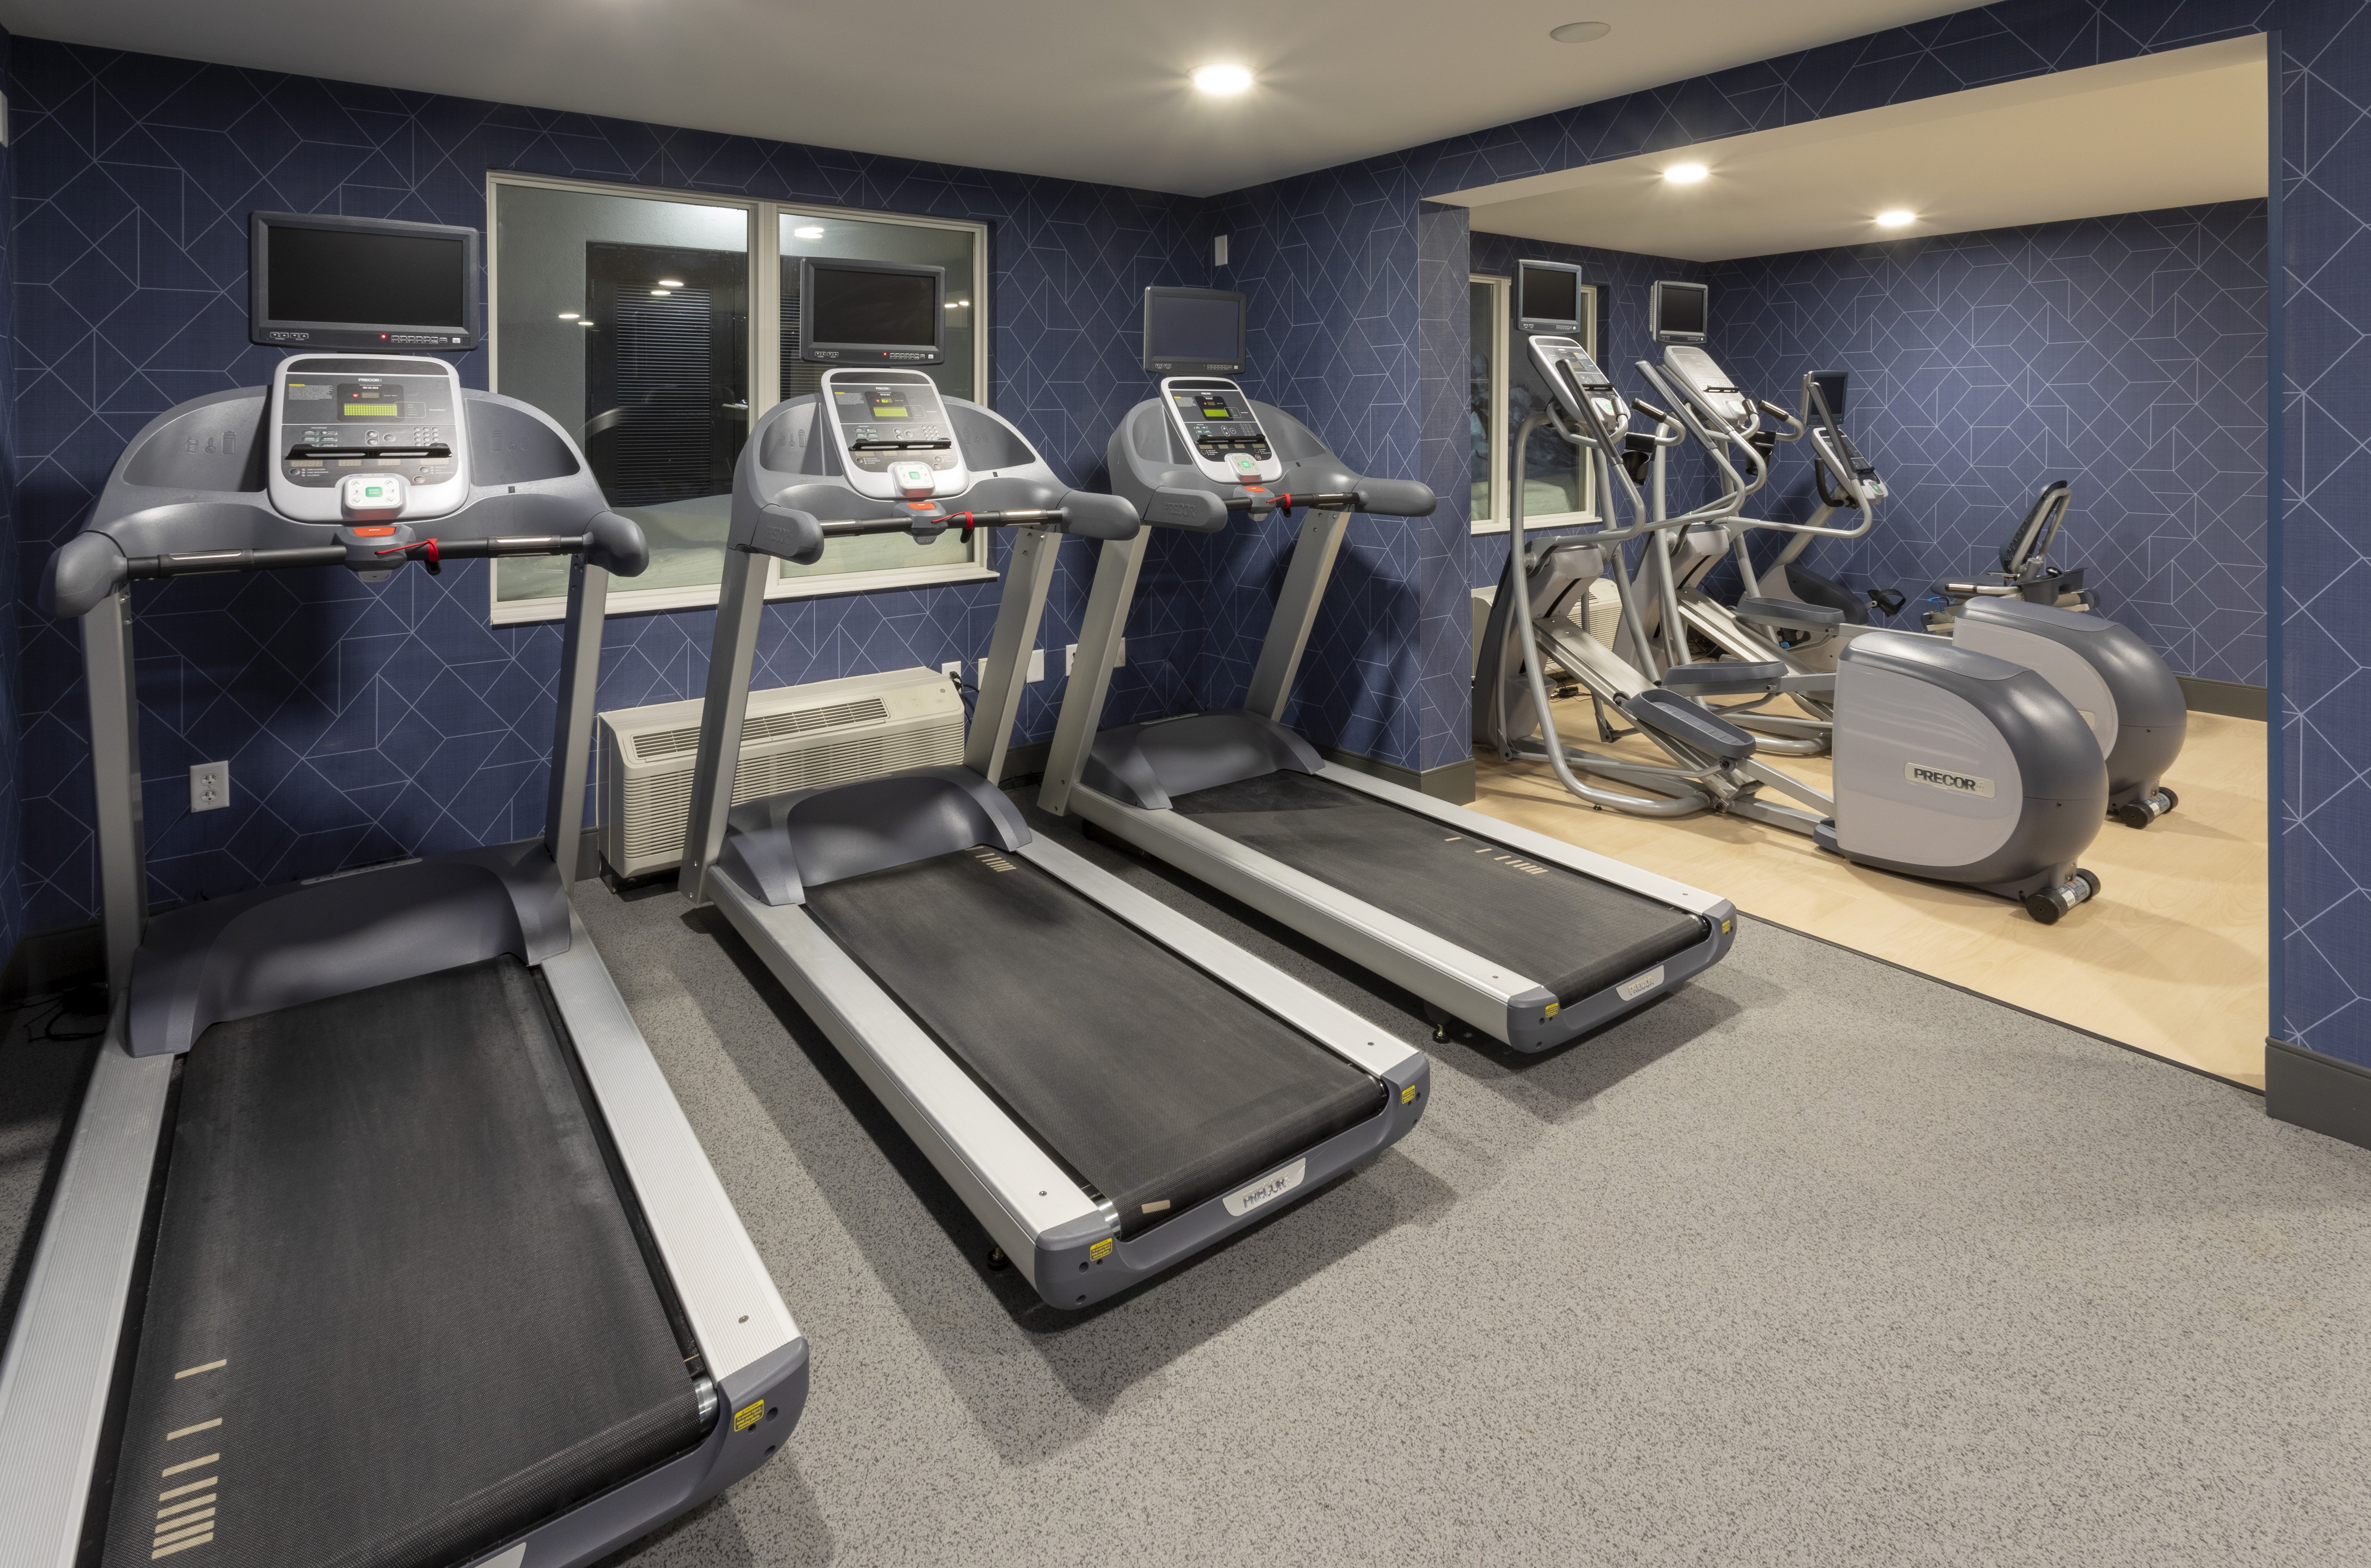 State-of-the-art fitness equipment in our expanded fitness center